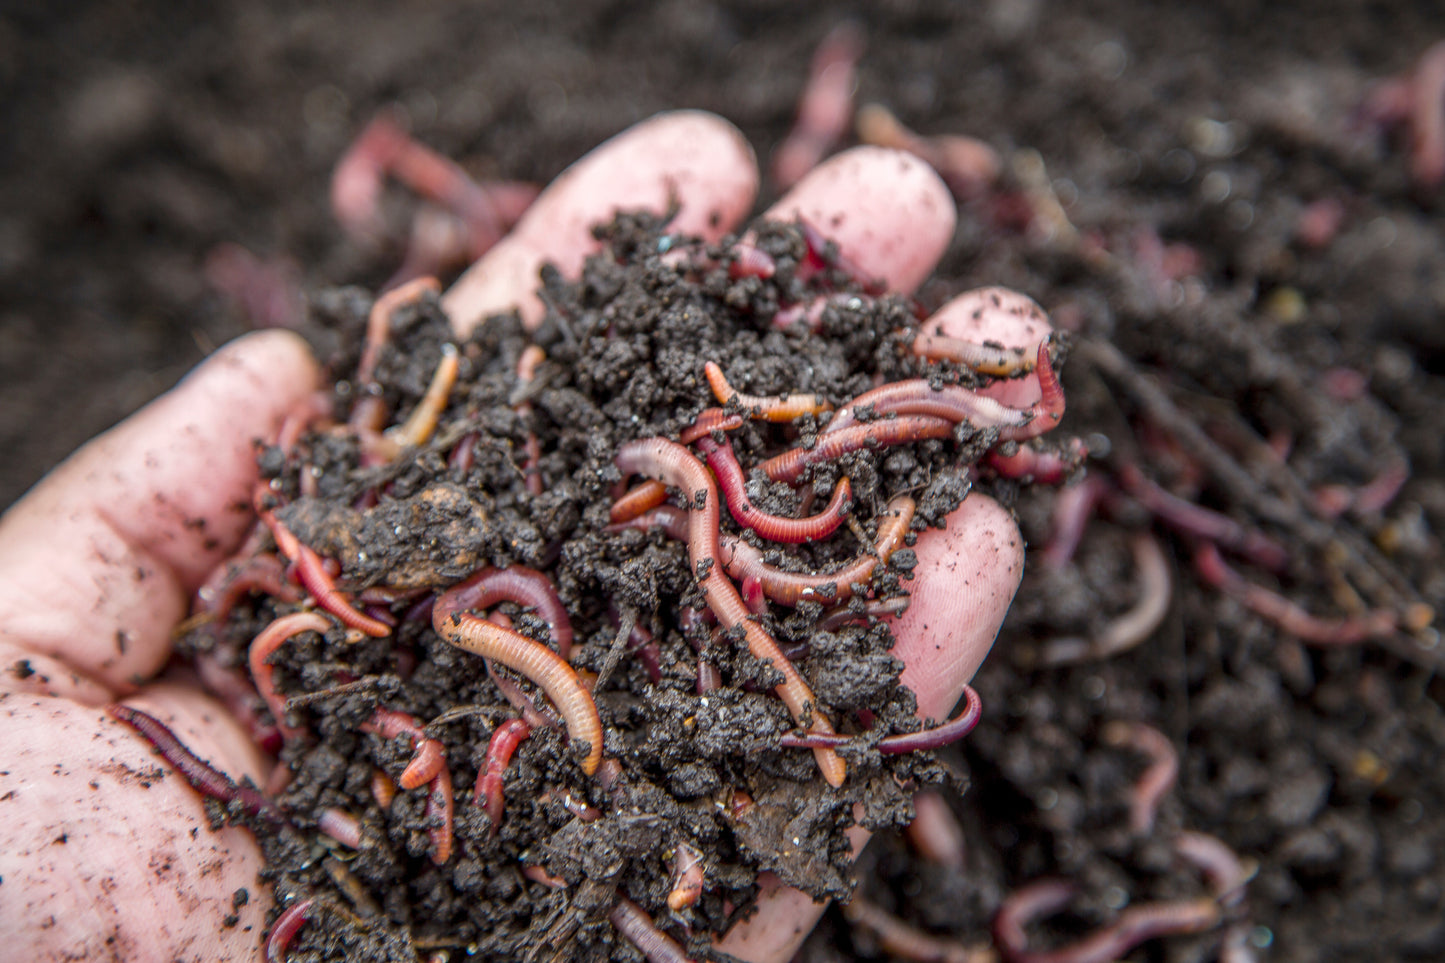 Scarlet's Worm Farm - 150 Composting Worms